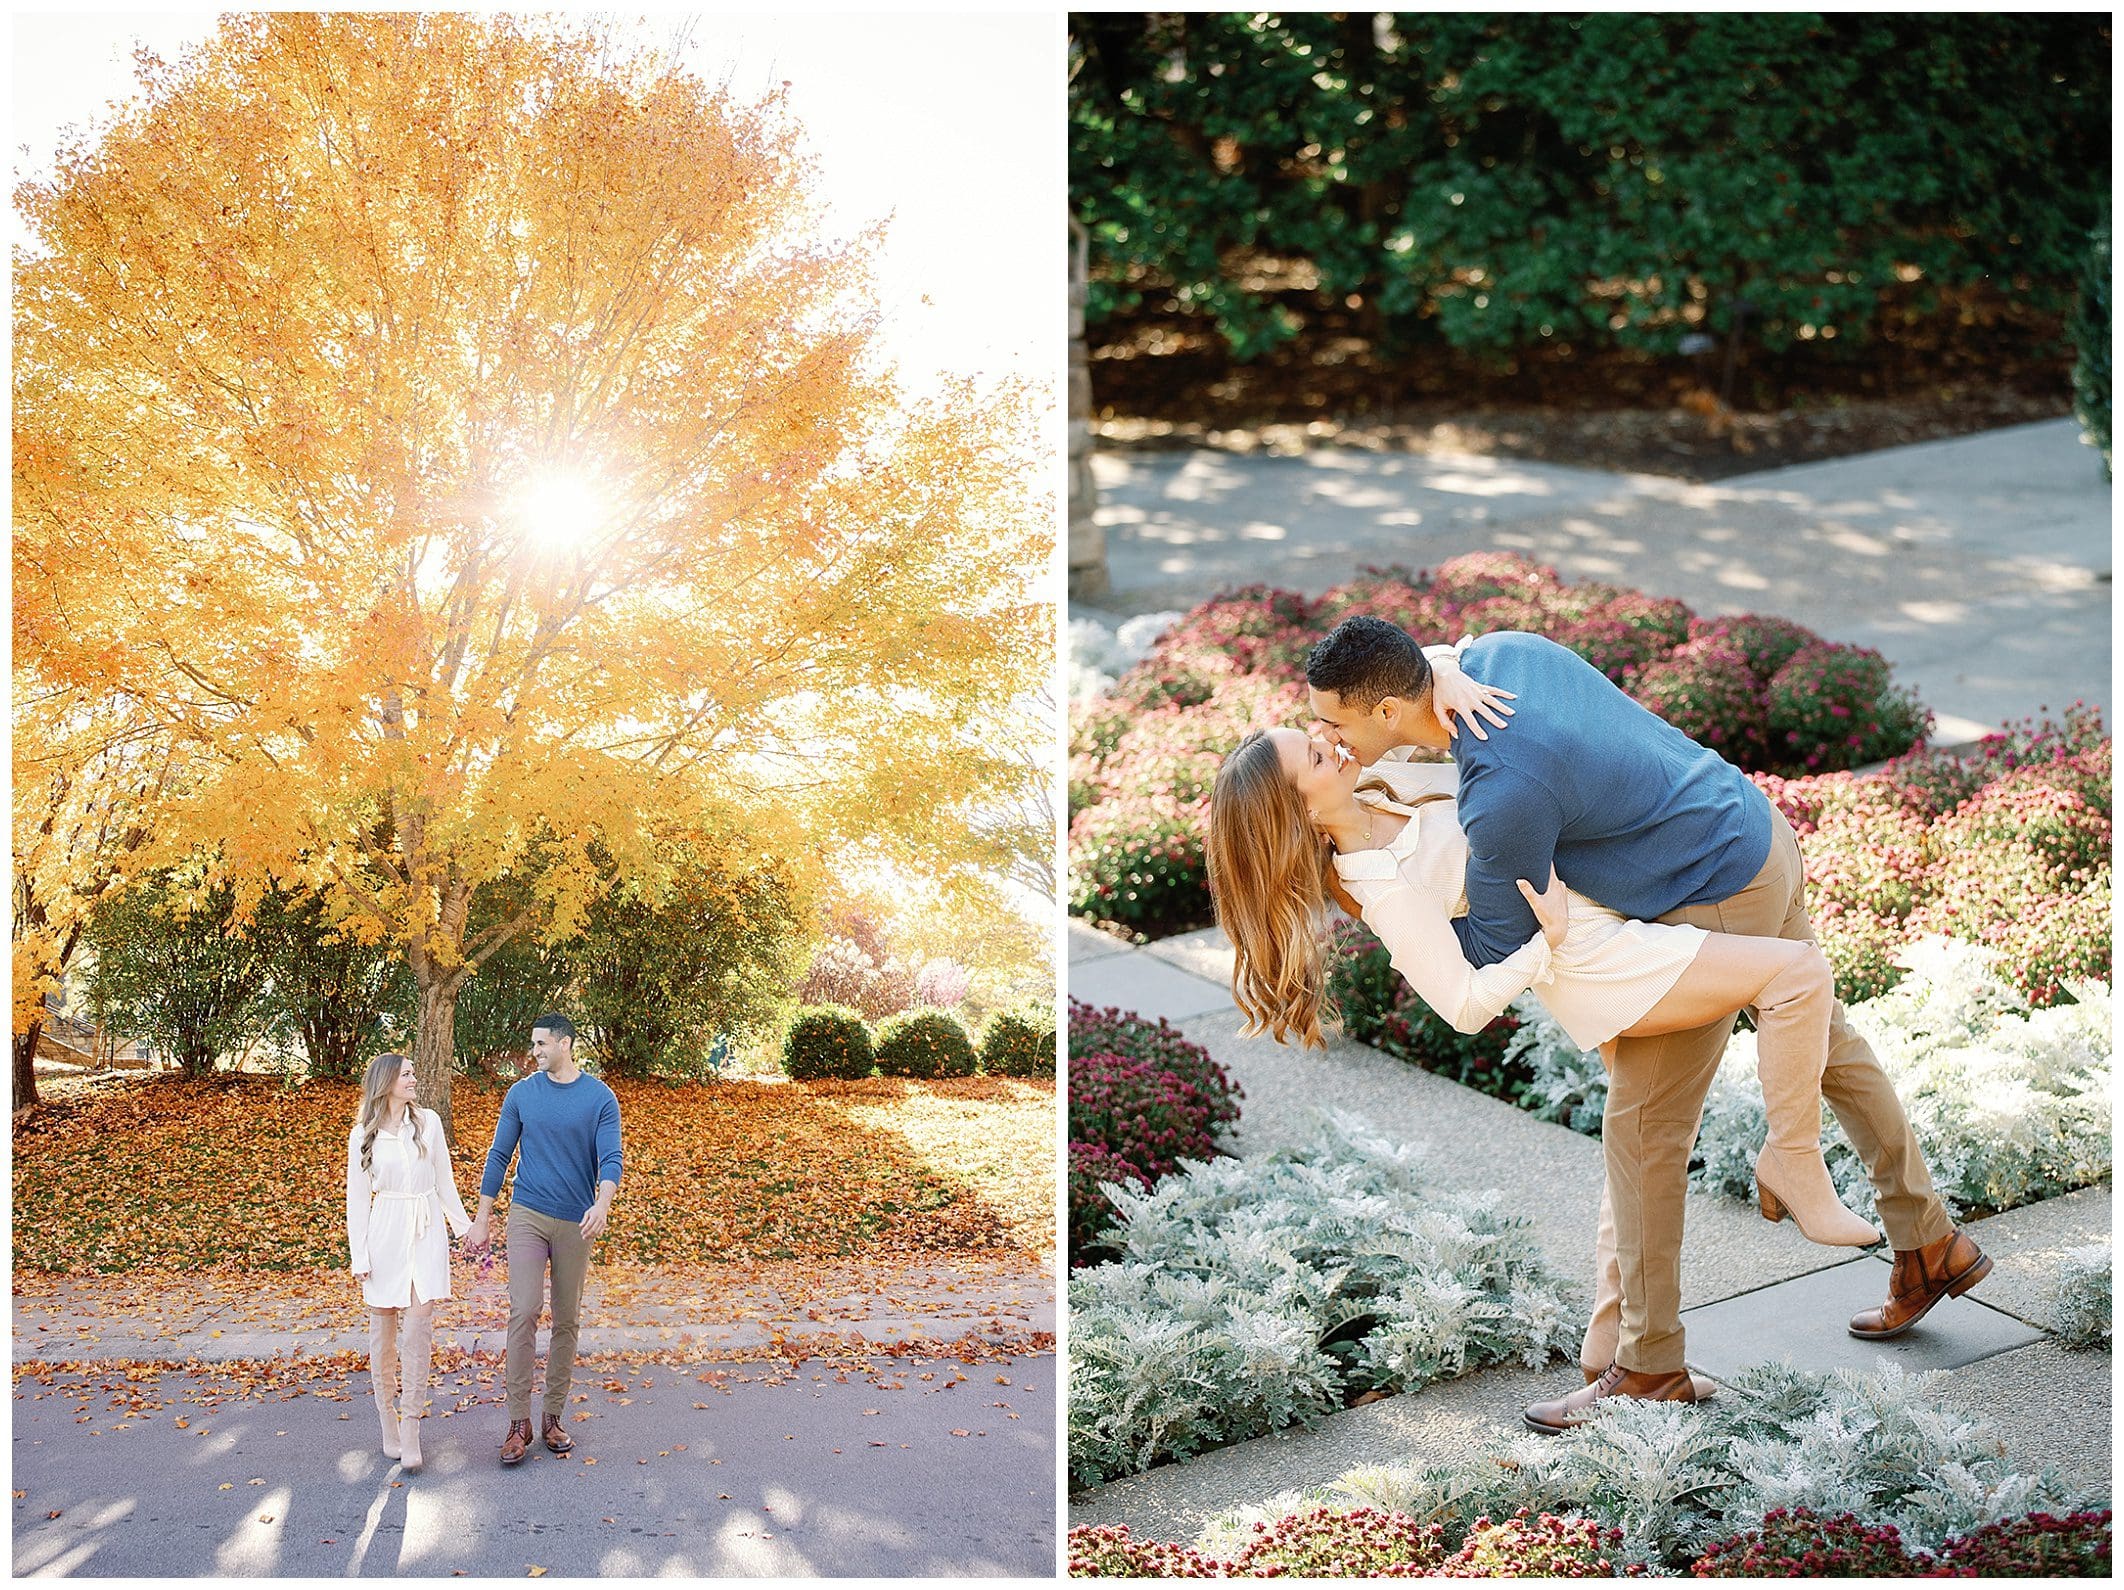 Left: A couple stands beneath a vibrant yellow tree with sunlight filtering through the leaves at sunrise. Right: The same couple embraces and shares a kiss beside a garden with pink flowers during their engagement.